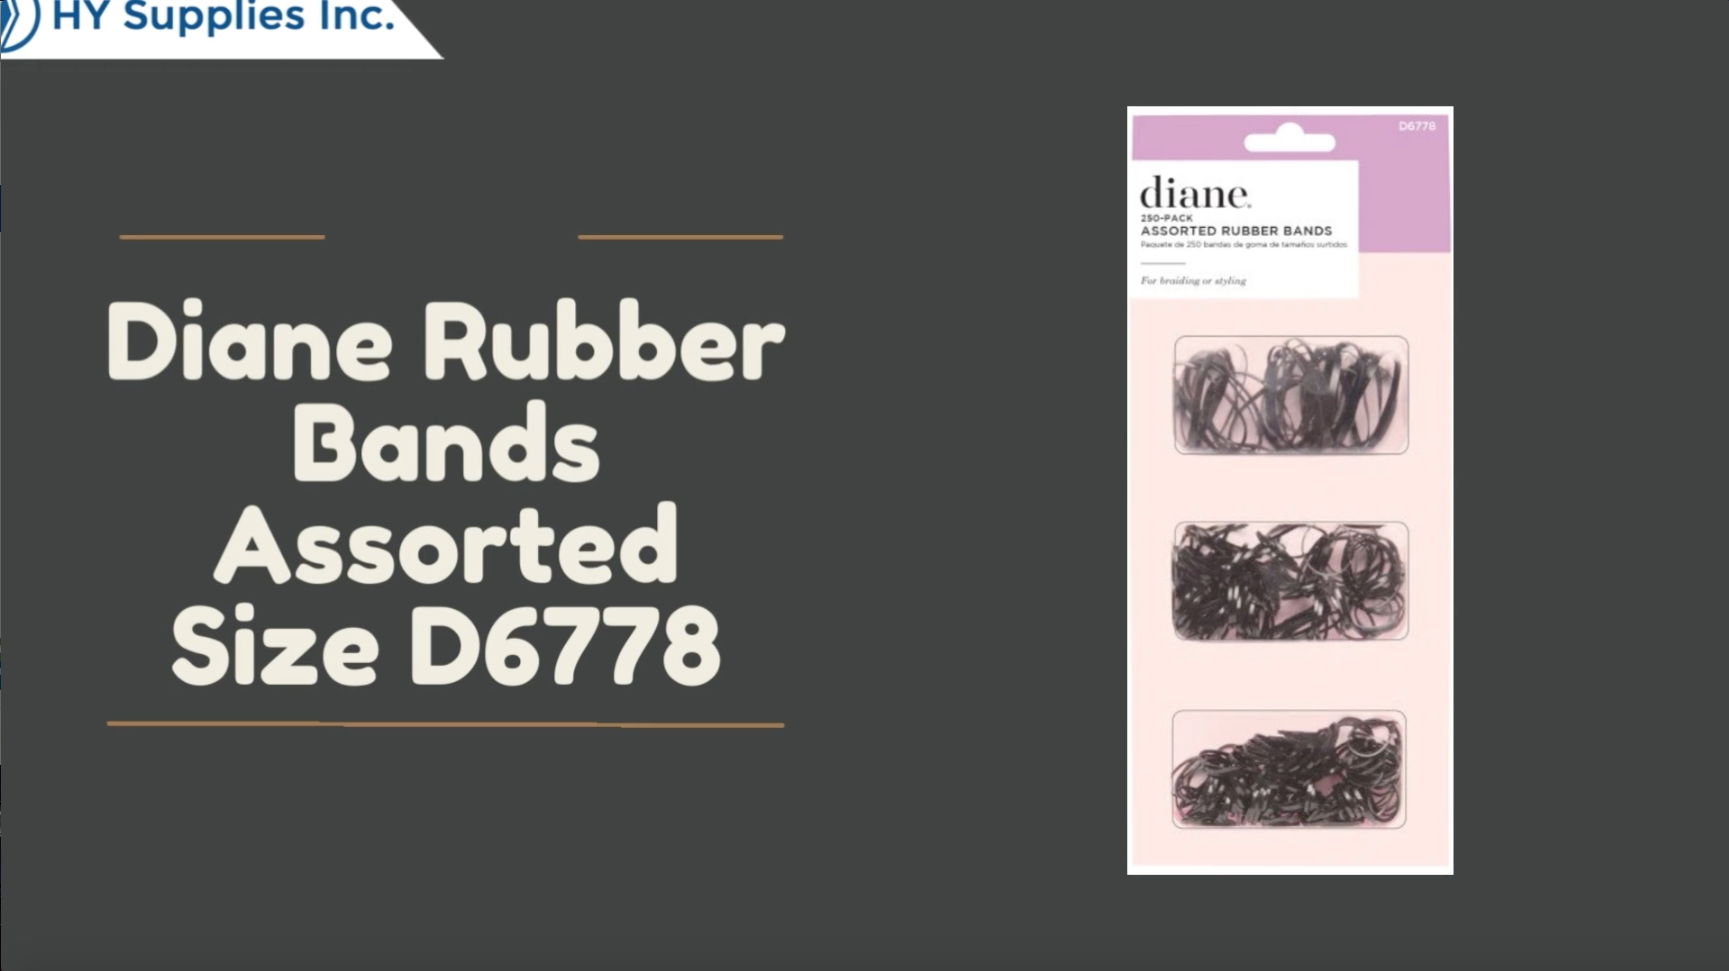 Diane Rubber Bands Assorted Size D6778 